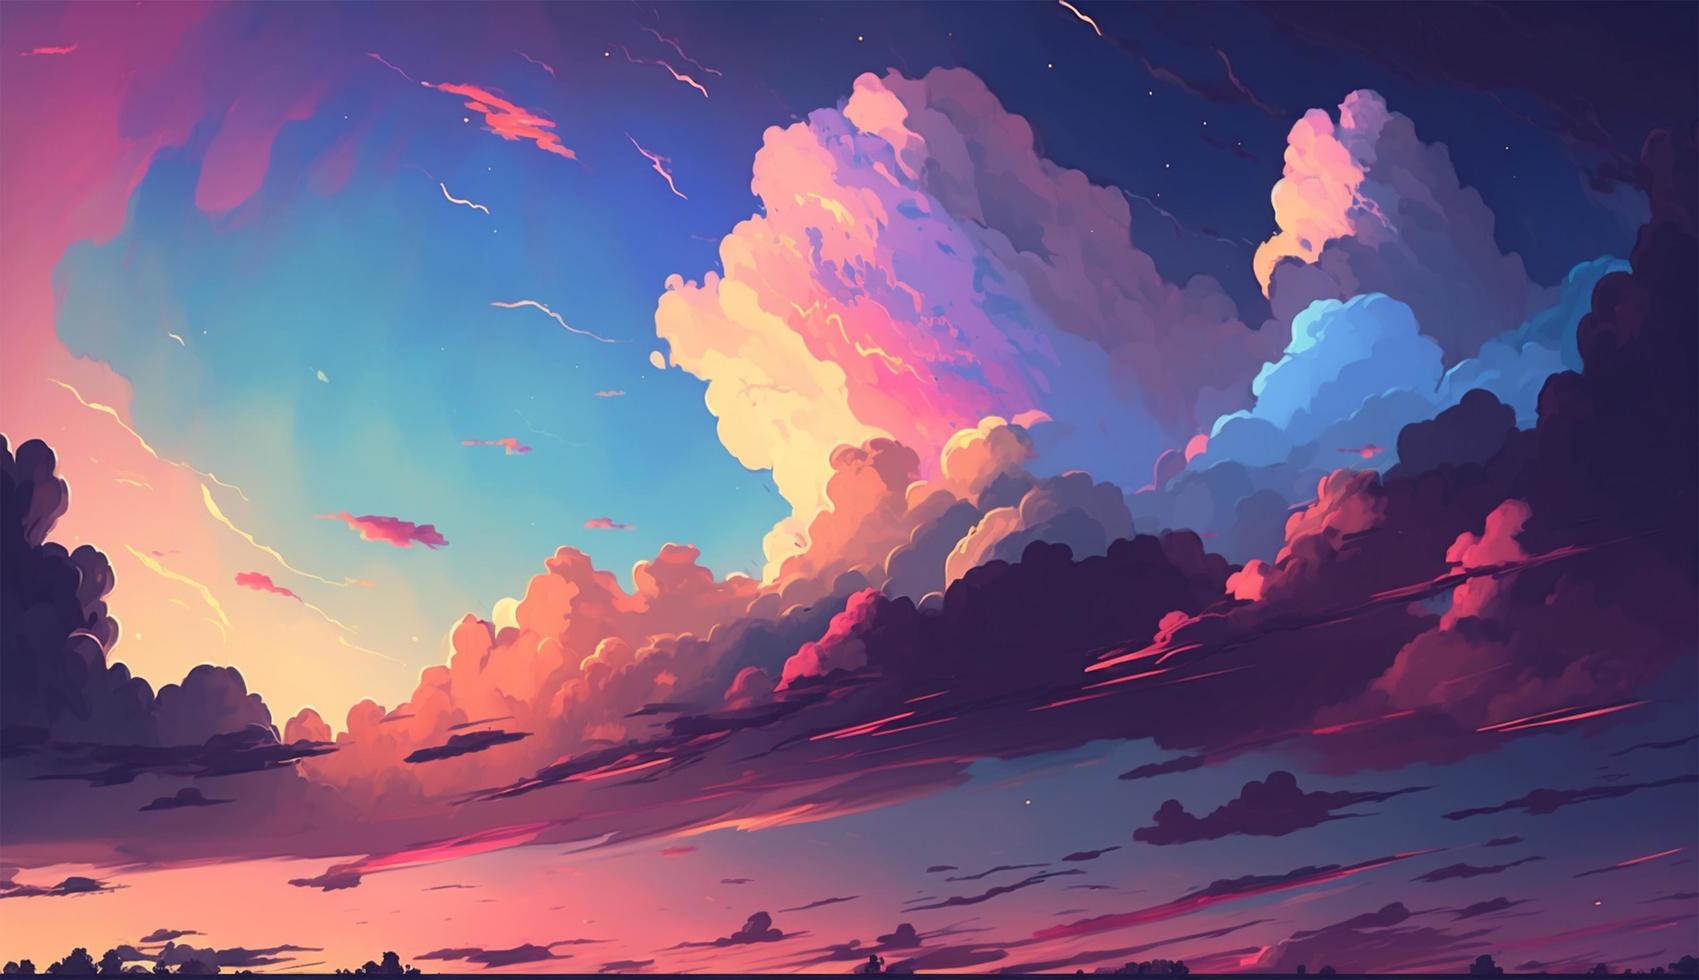 A digital painting of a sunset sky with pink and purple clouds - Sky